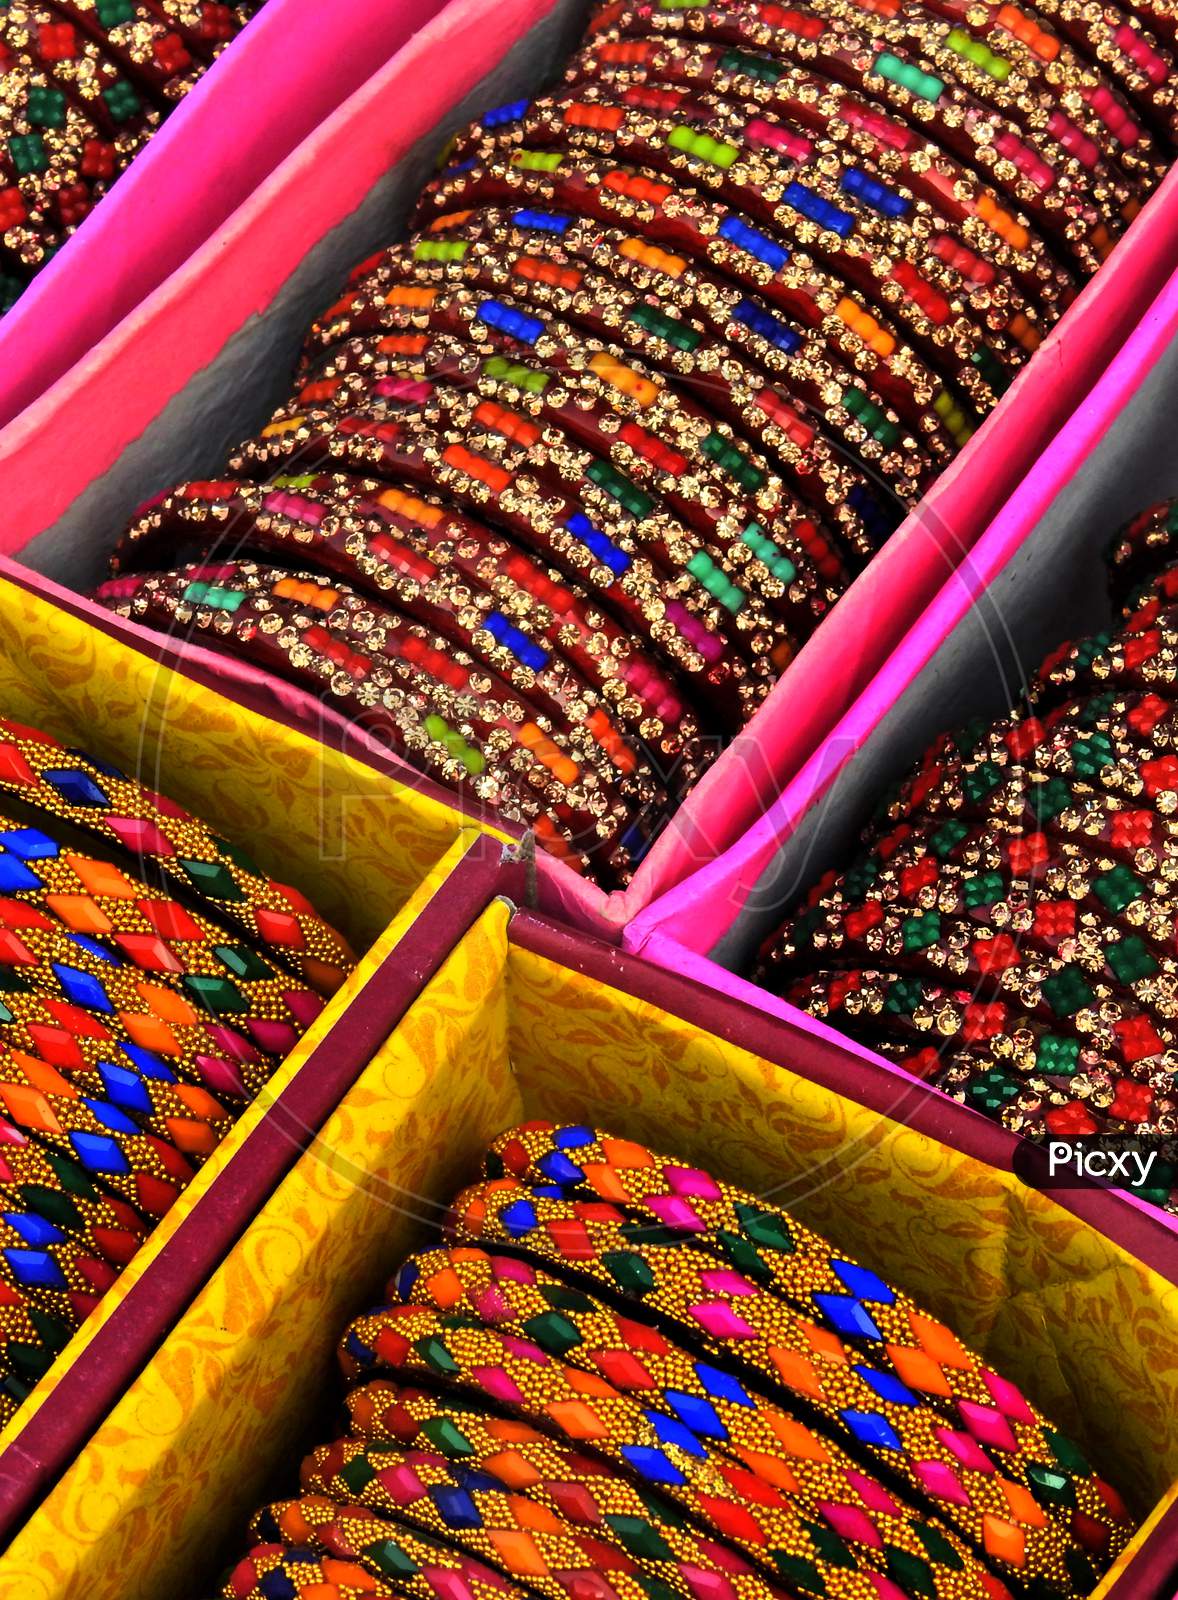 Indian Woman Fashion Or Traditional Accessories Bangle In Shop Display